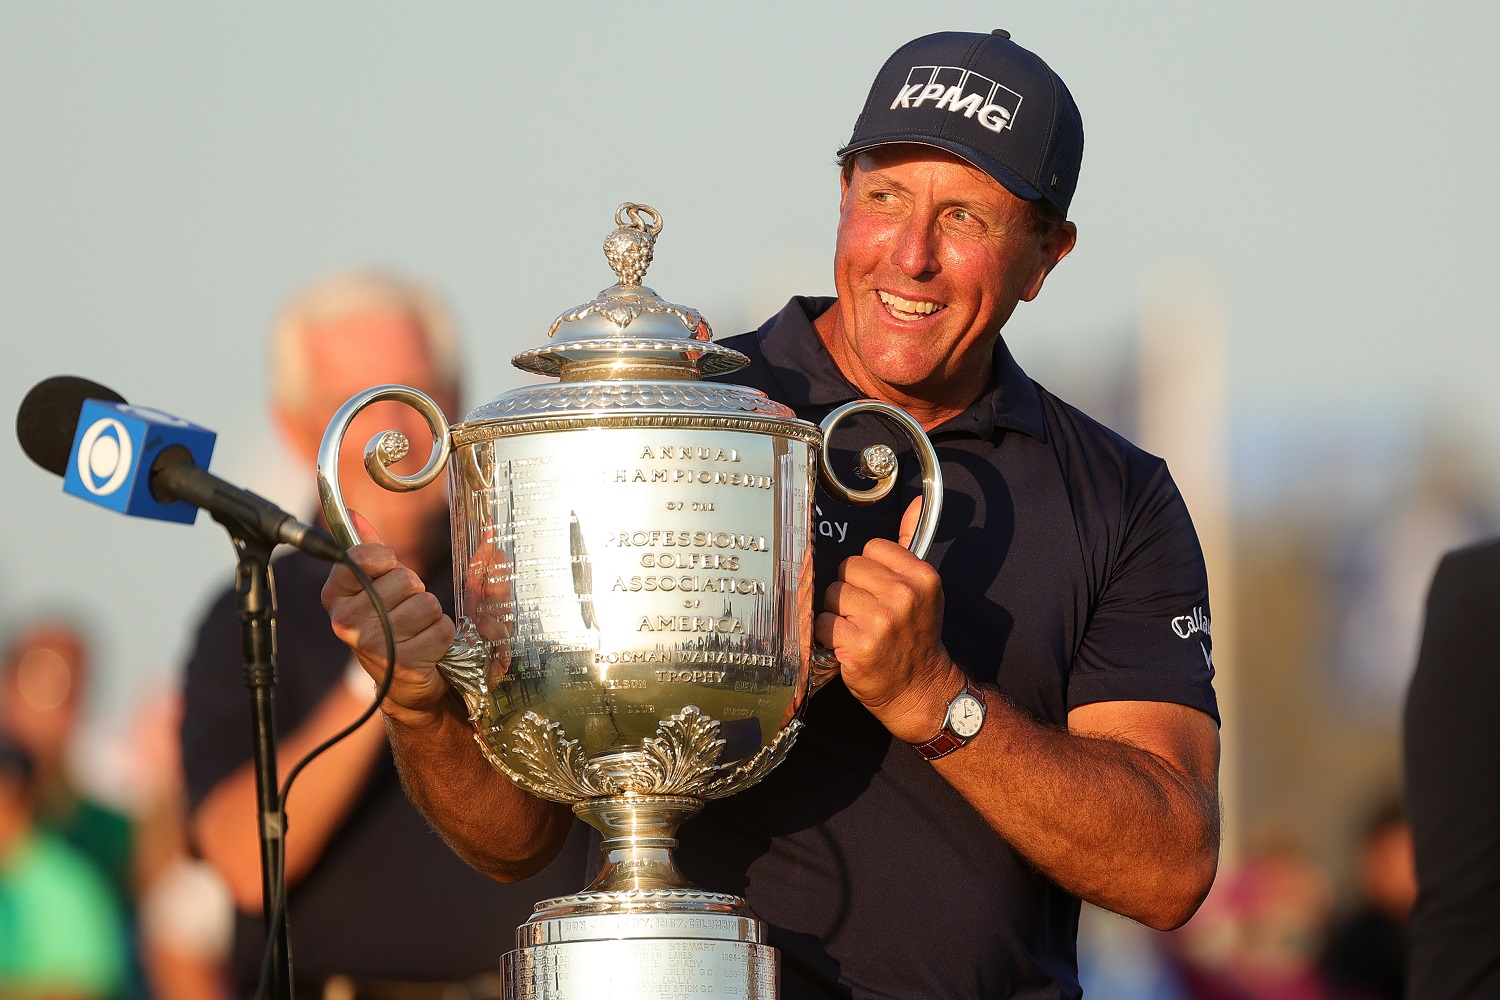 Phil Mickelson celebrates with the Wanamaker Trophy after winning the 2021 PGA Championship at Kiawah Island Golf Resort.